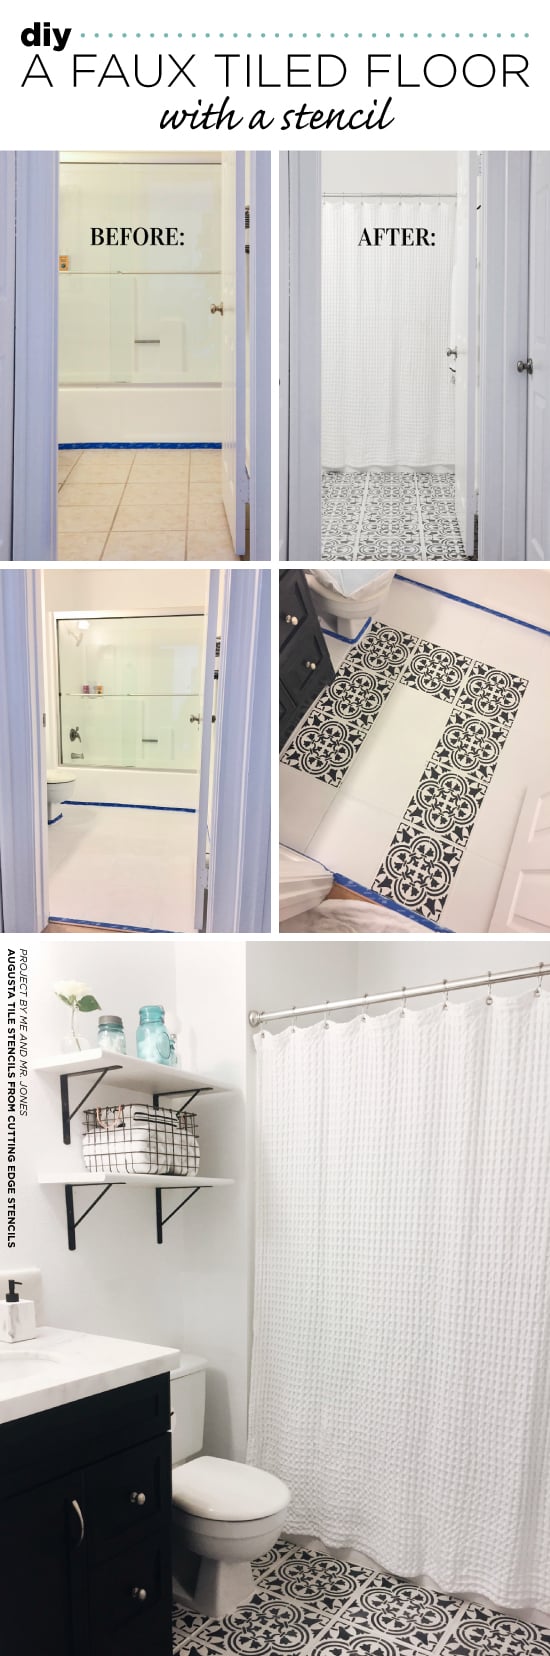 Cutting Edge Stencils shares how to give a bathroom a faux tile floor using the Augusta Tile Stencil. http://www.cuttingedgestencils.com/augusta-tile-stencil-design-patchwork-tiles-stencils.html